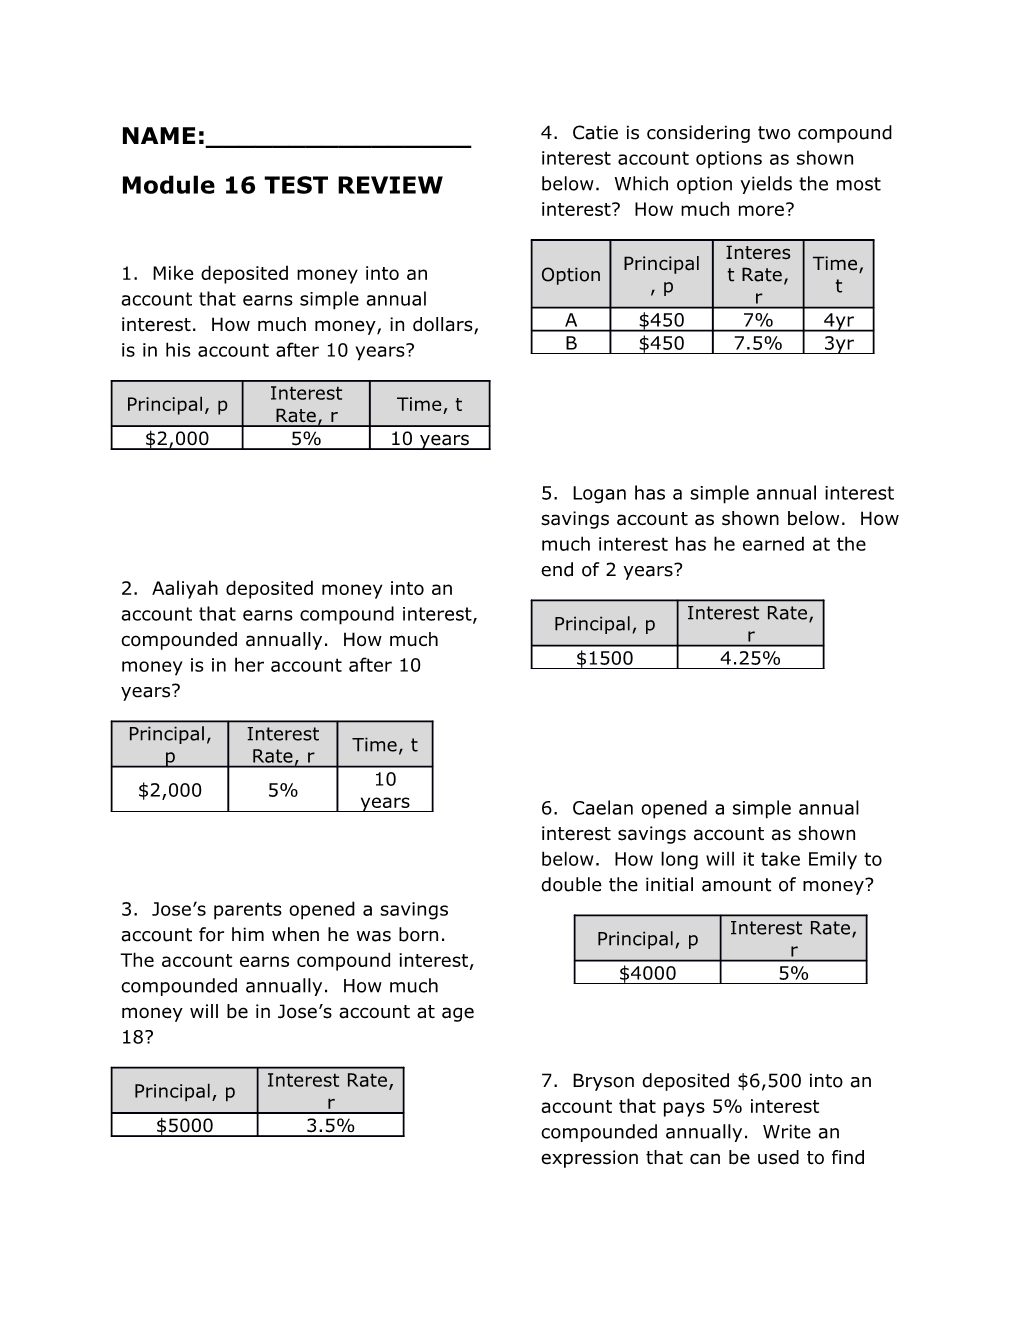 Module 16 TEST REVIEW